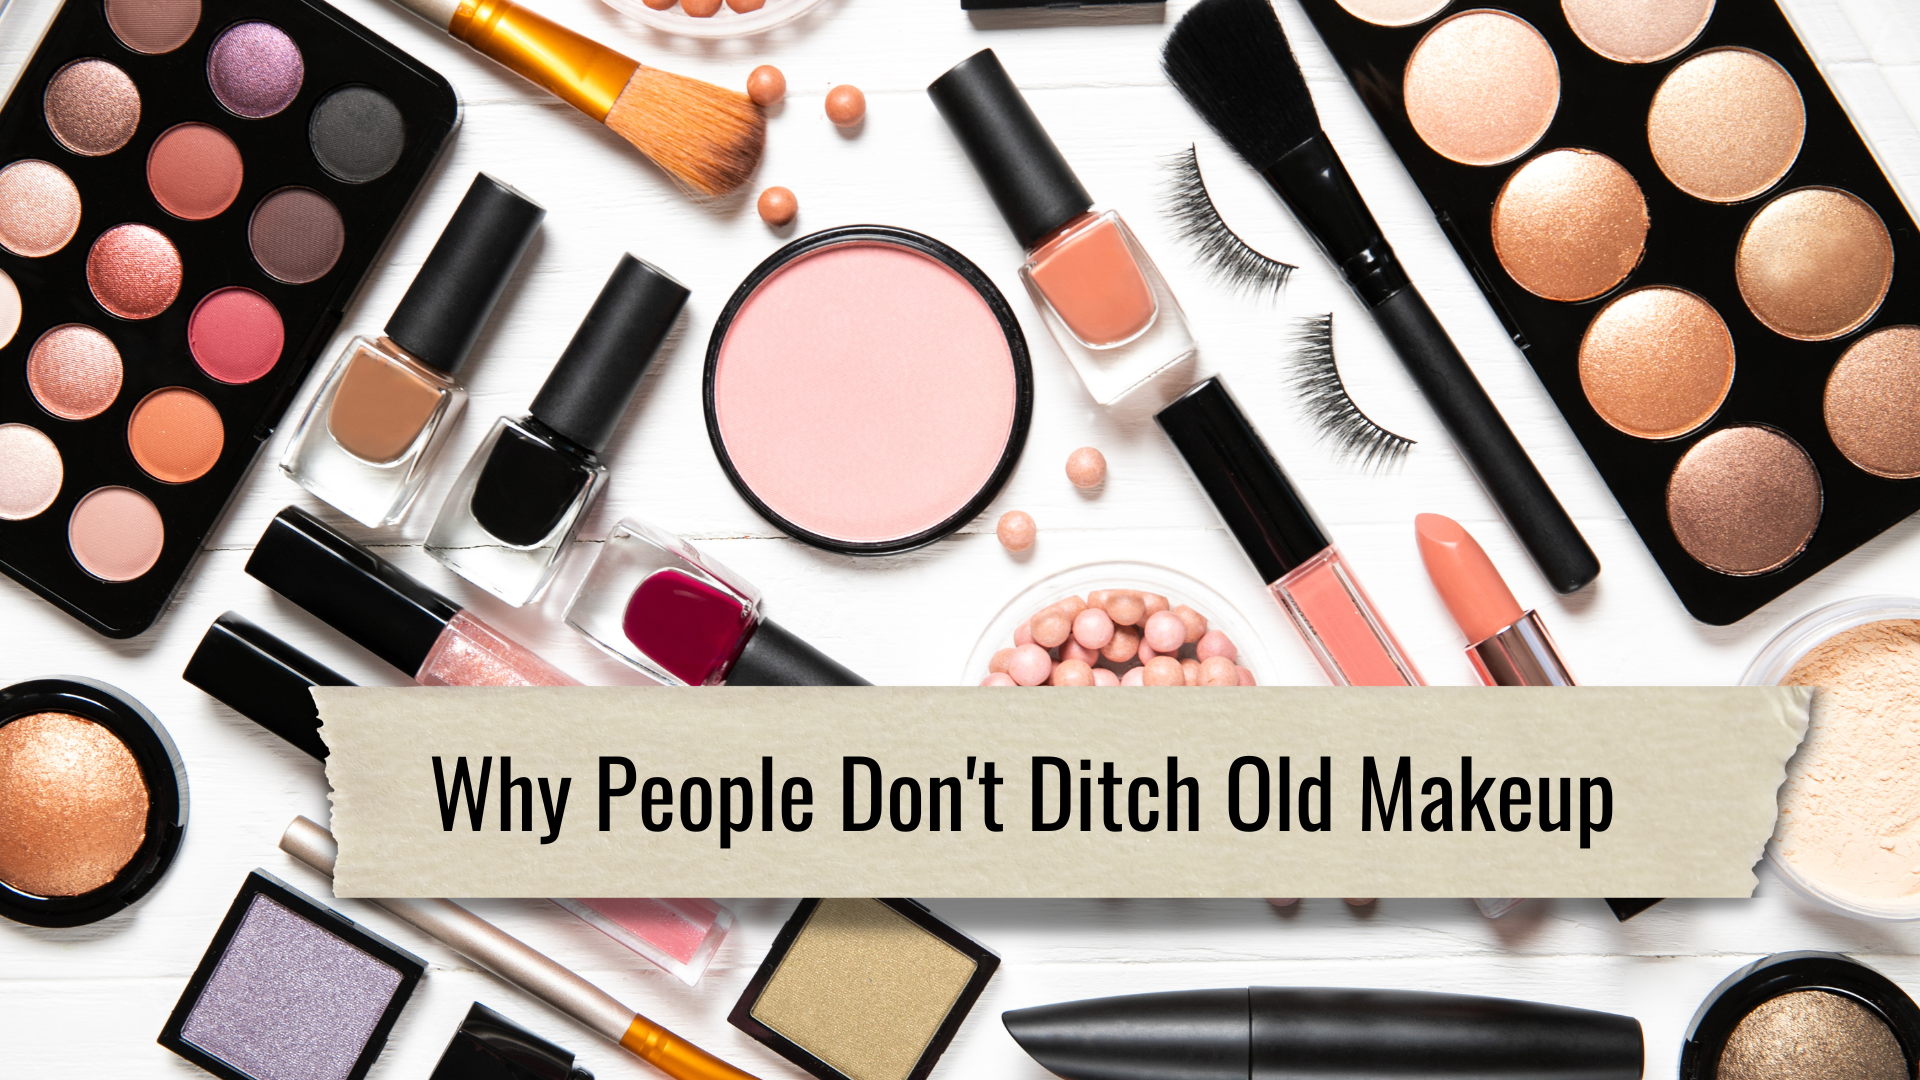 12 Why people don't ditch old makeup